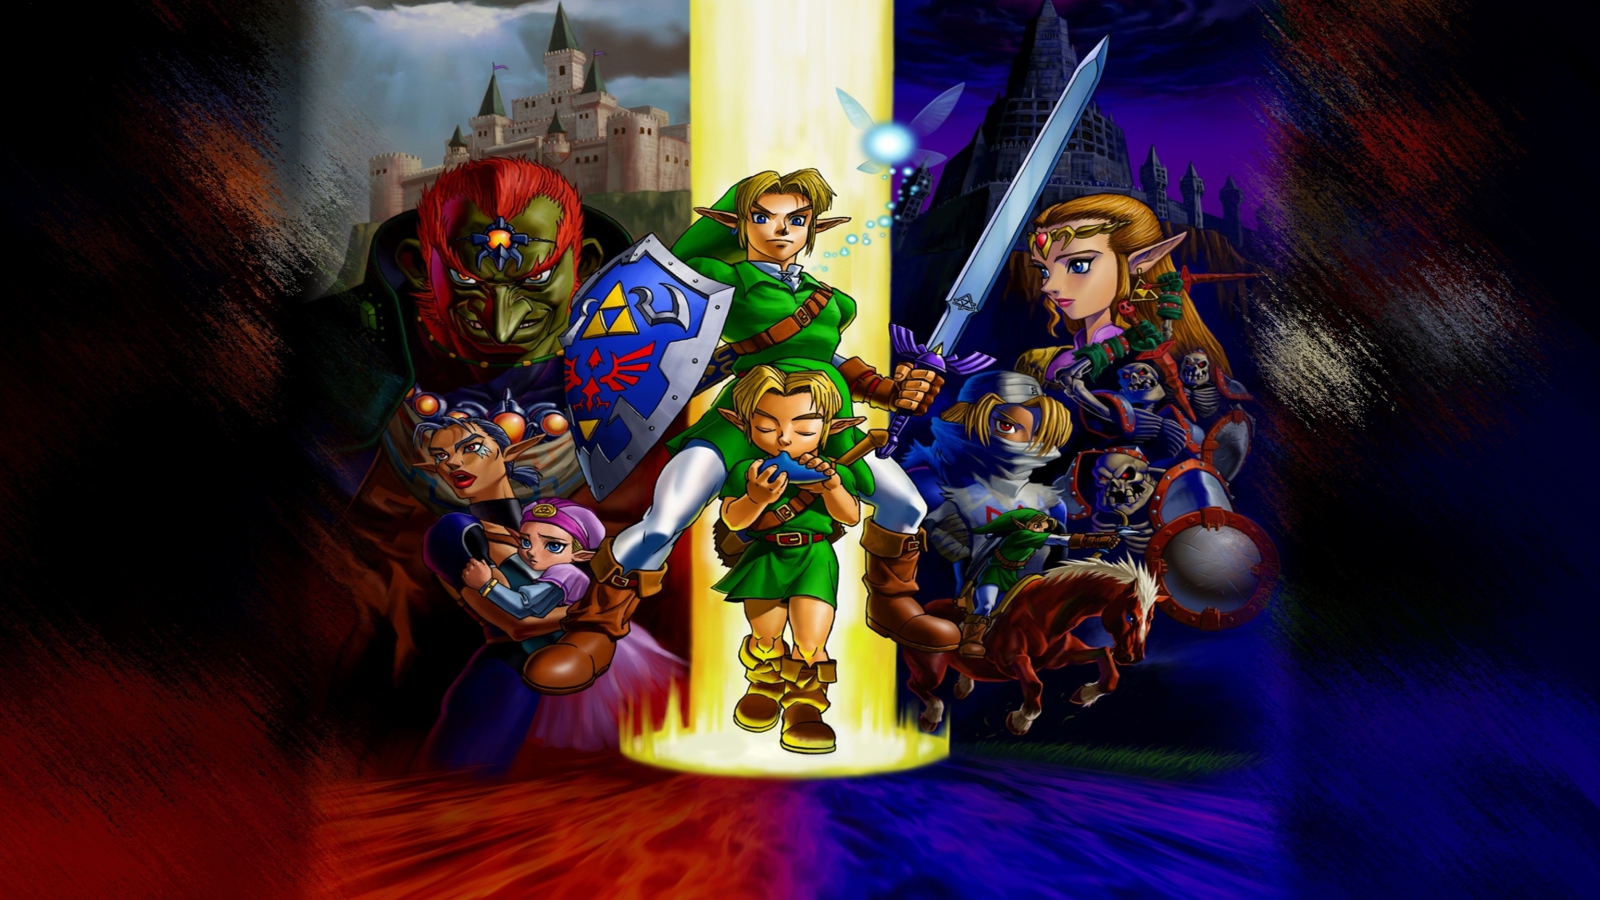 introducing-ocarina-of-time-week-celebrating-the-20th-birthday-of-a